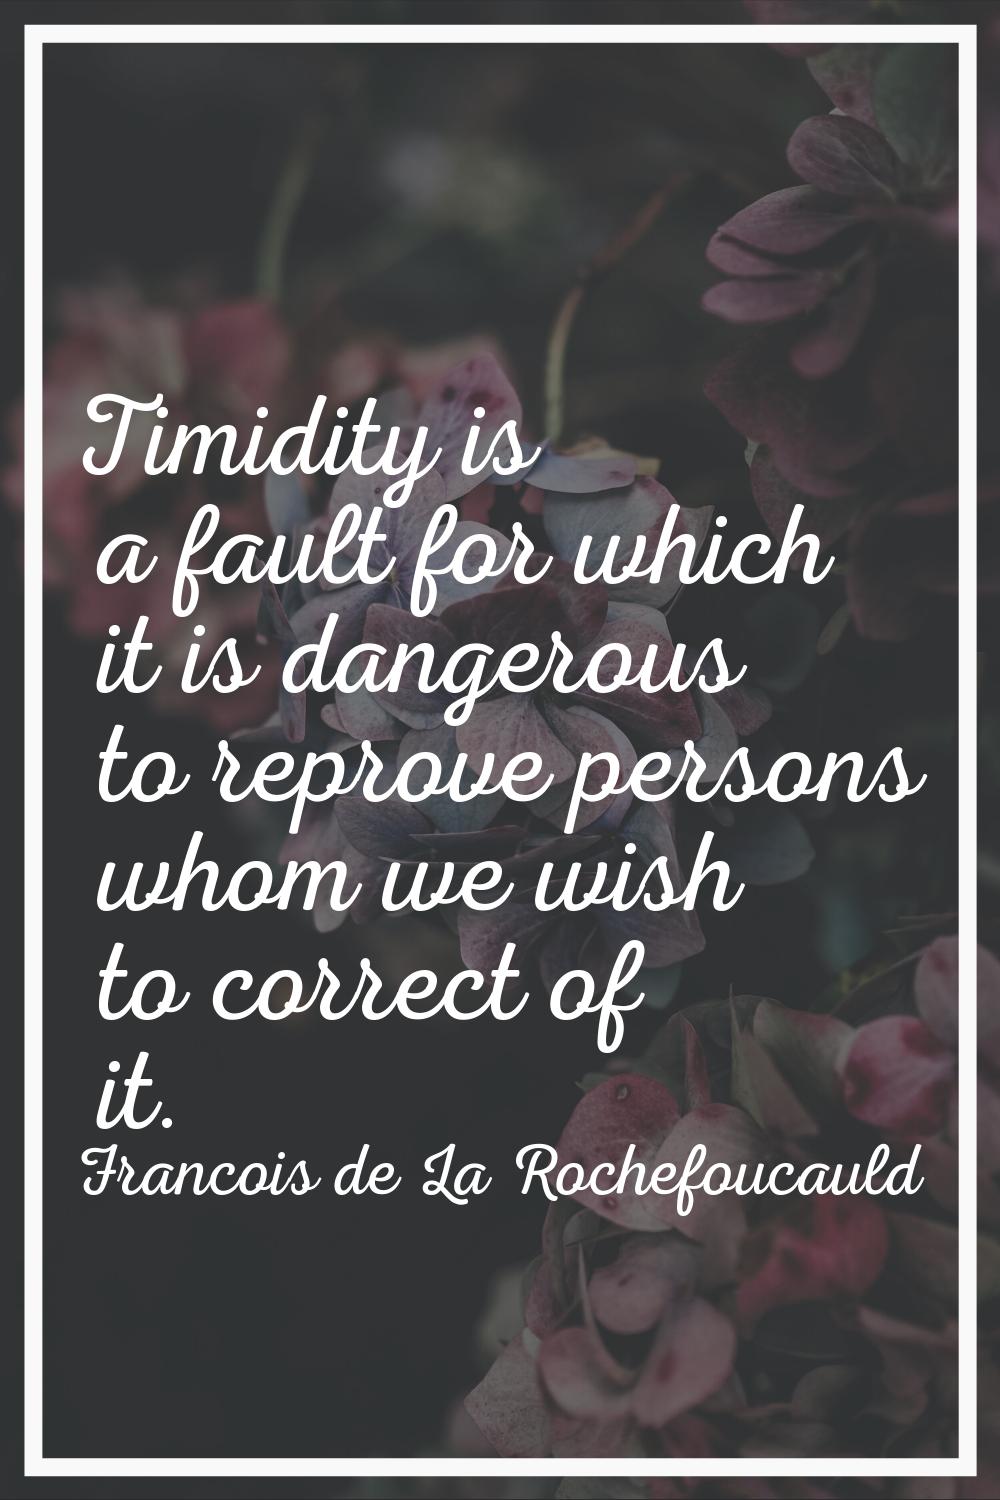 Timidity is a fault for which it is dangerous to reprove persons whom we wish to correct of it.